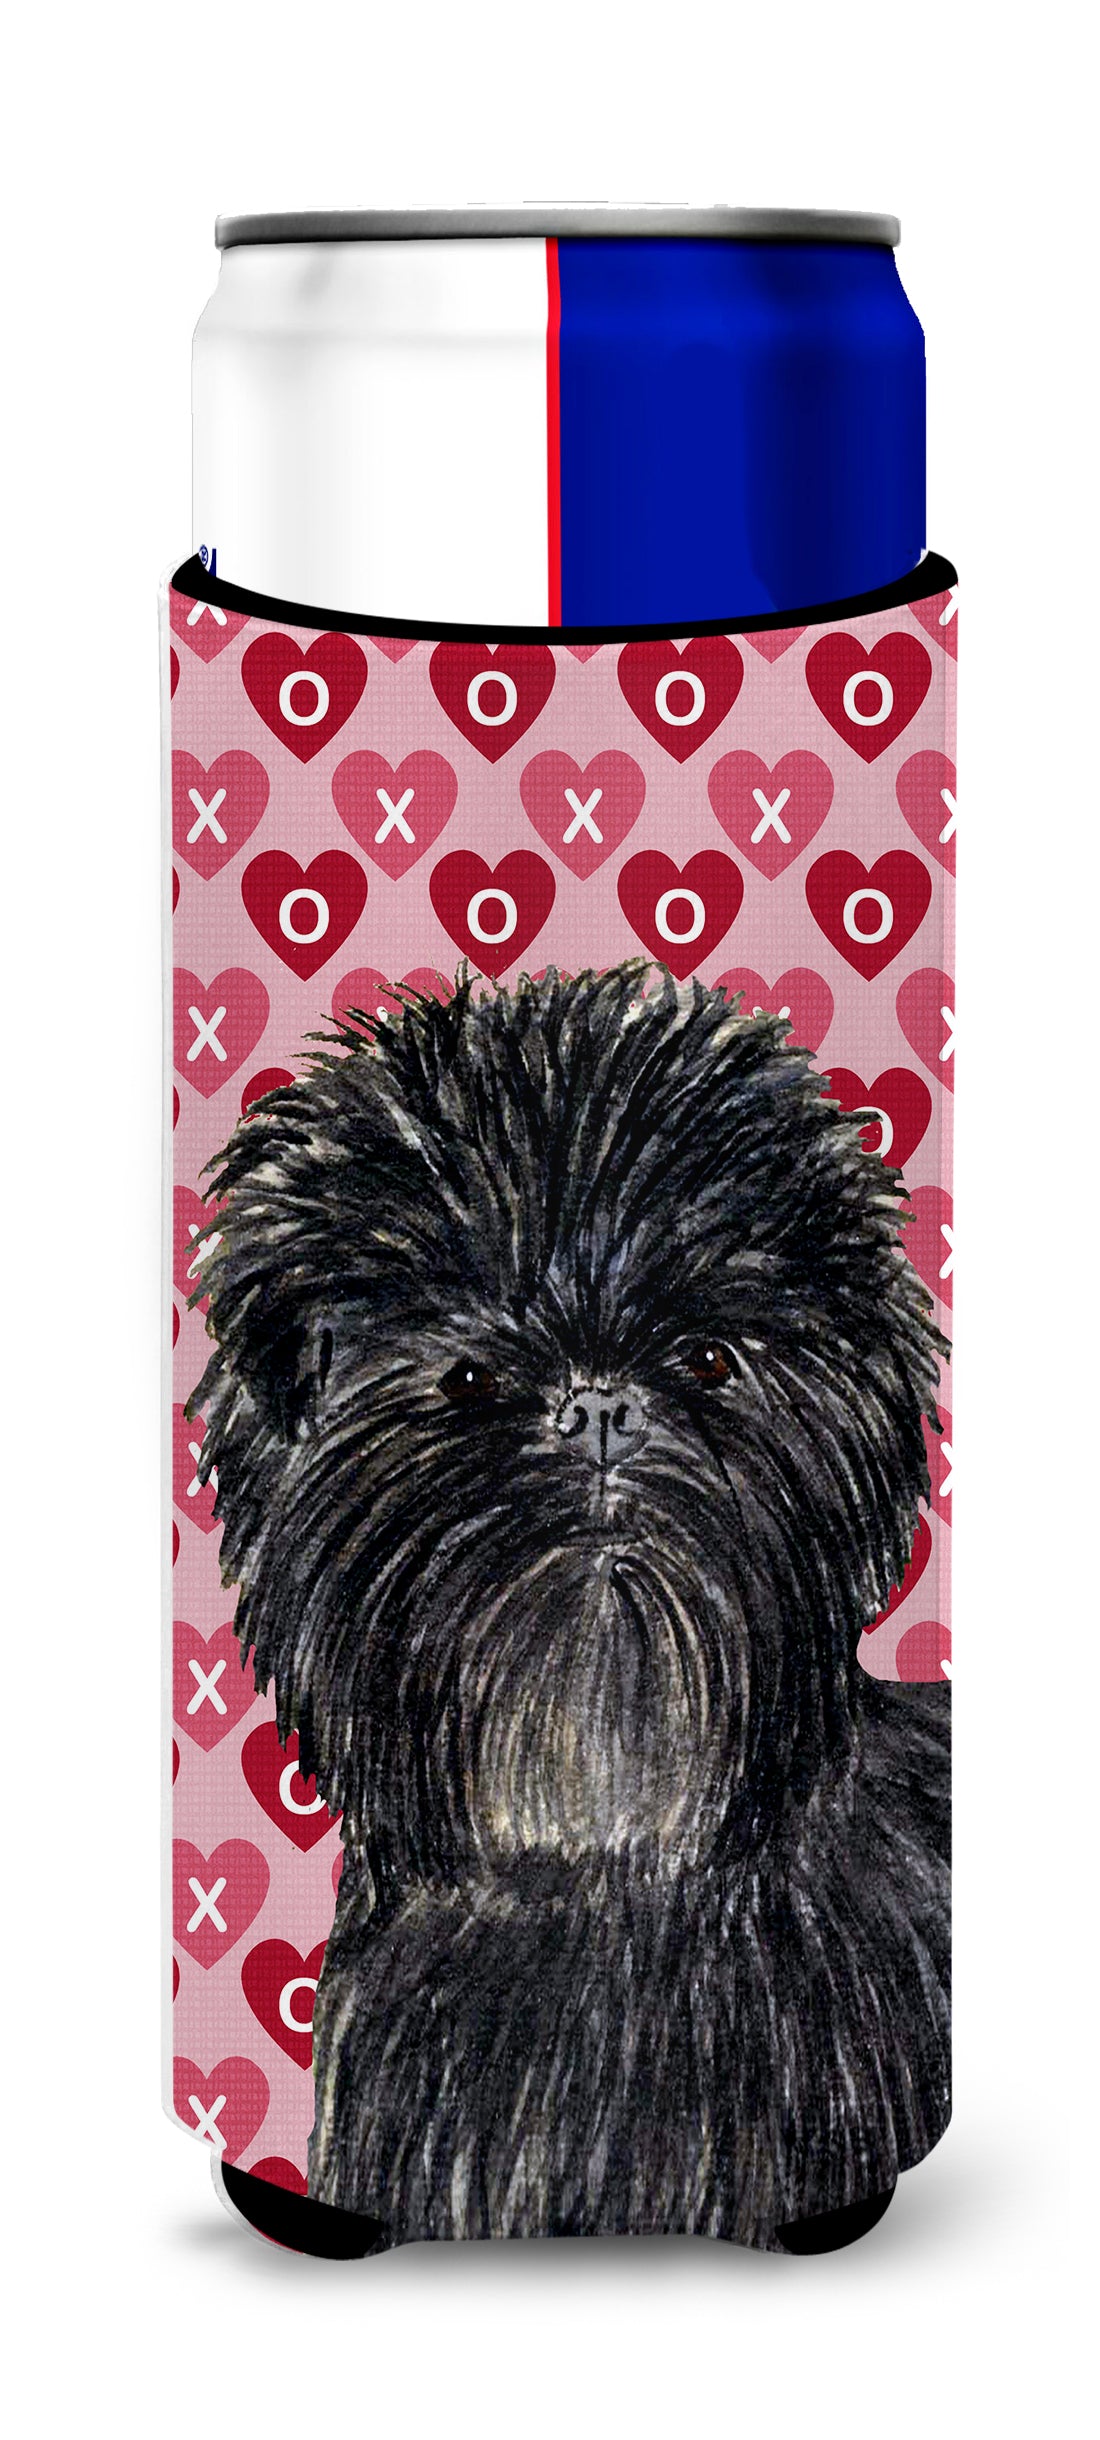 Affenpinscher Hearts Love and Valentine's Day Portrait Ultra Beverage Insulators for slim cans SS4511MUK